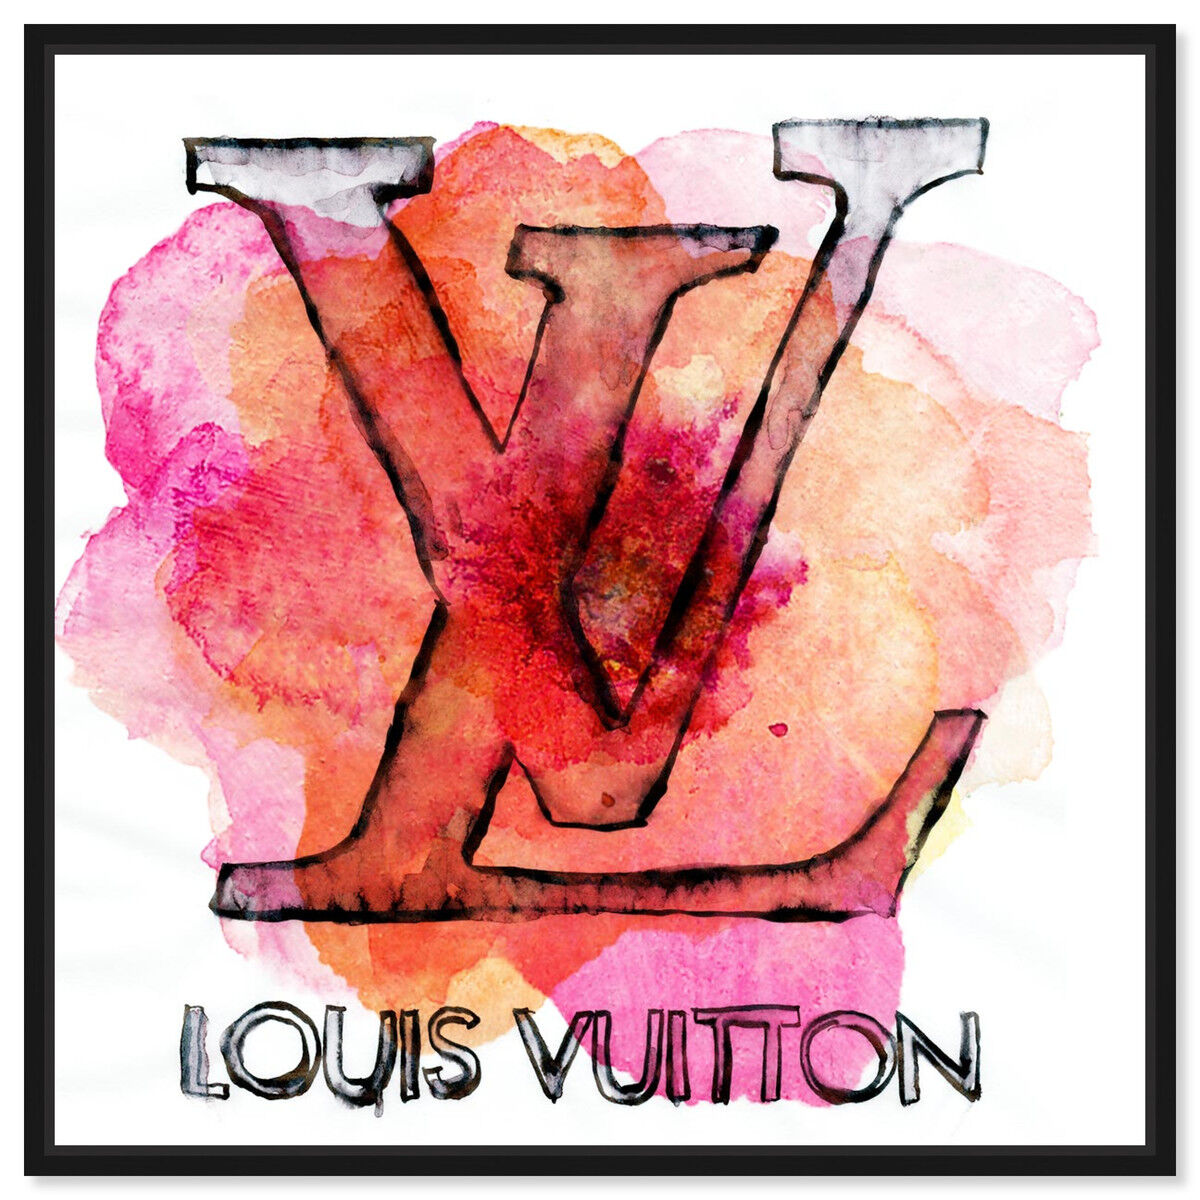  Louis Vuitton marble and gold picture canvas print 160x70cm lv15